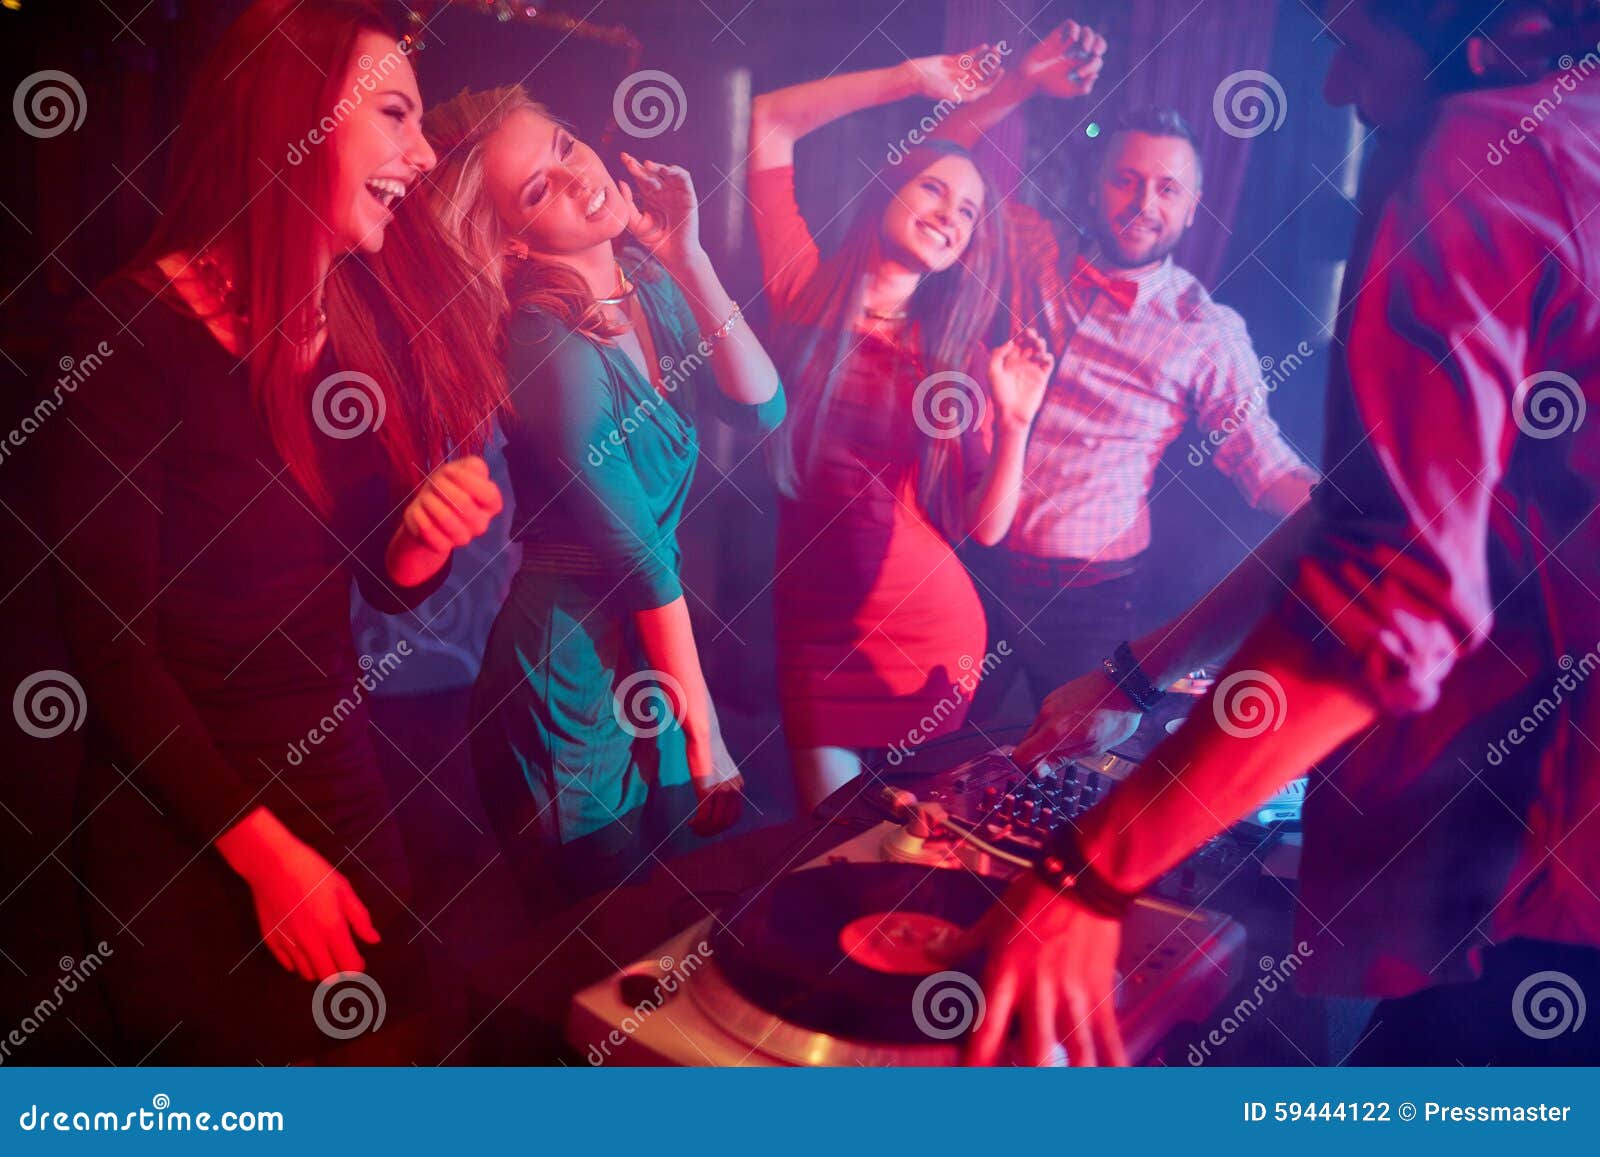 Pretty Dancers by Turntables Stock Photo - Image of young, music: 59444122